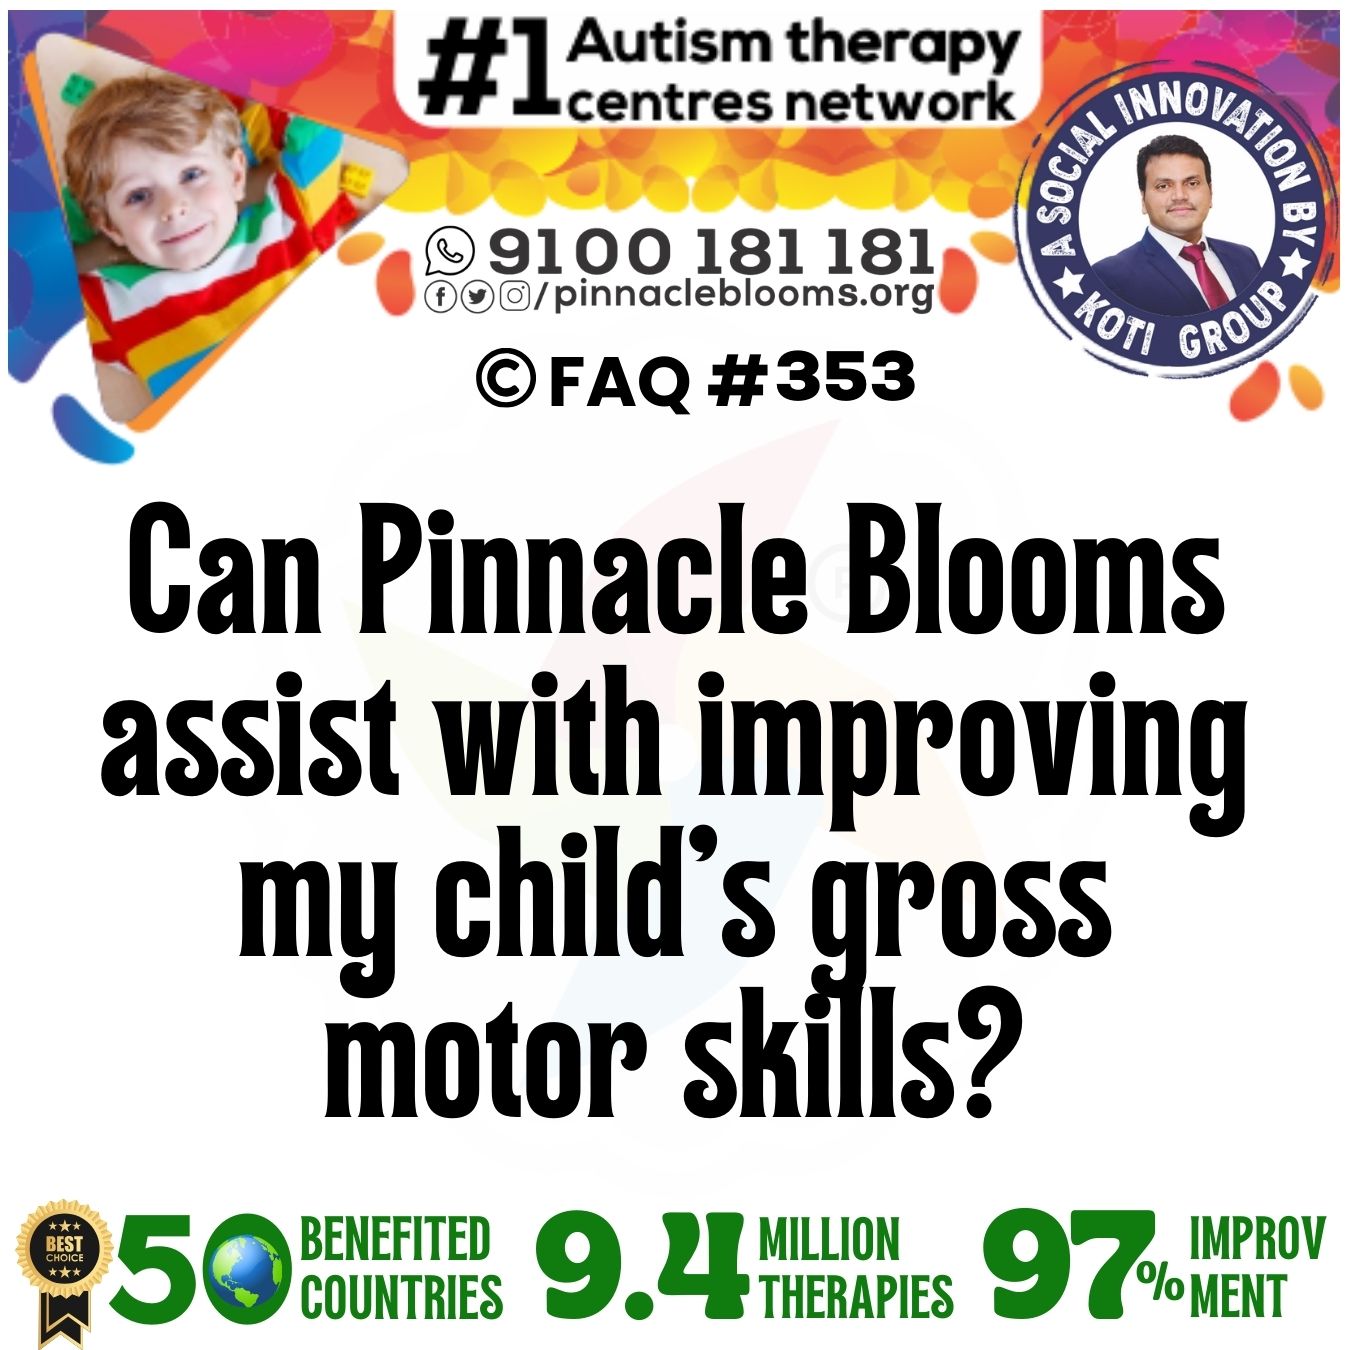 Can Pinnacle Blooms assist with improving my child's gross motor skills?